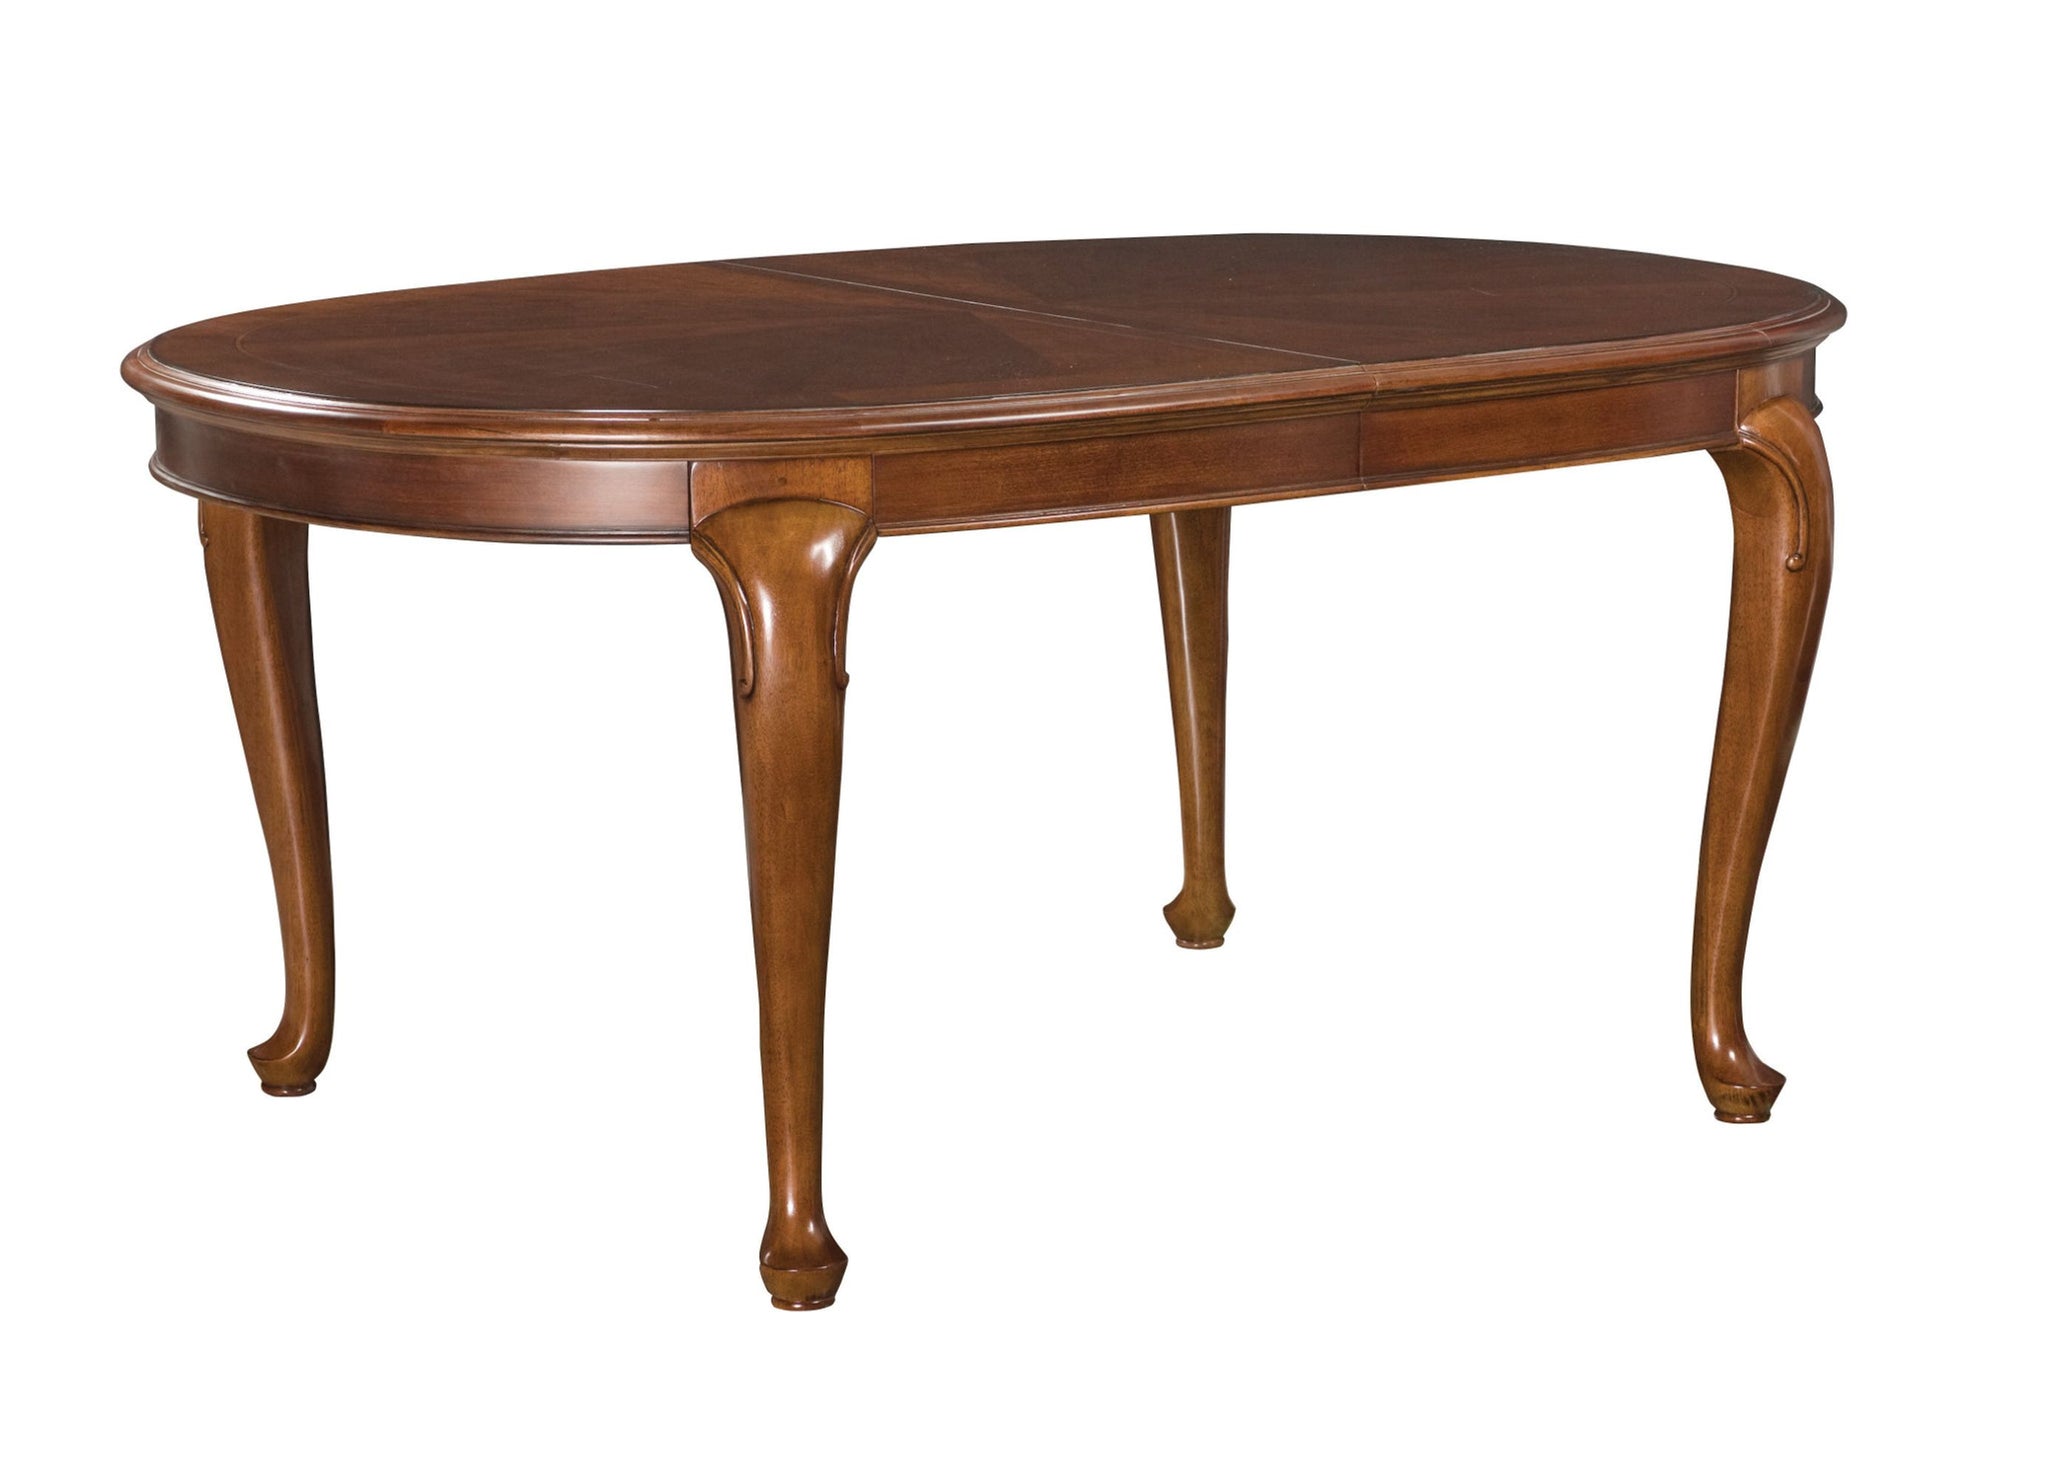 OVAL DINING TABLE